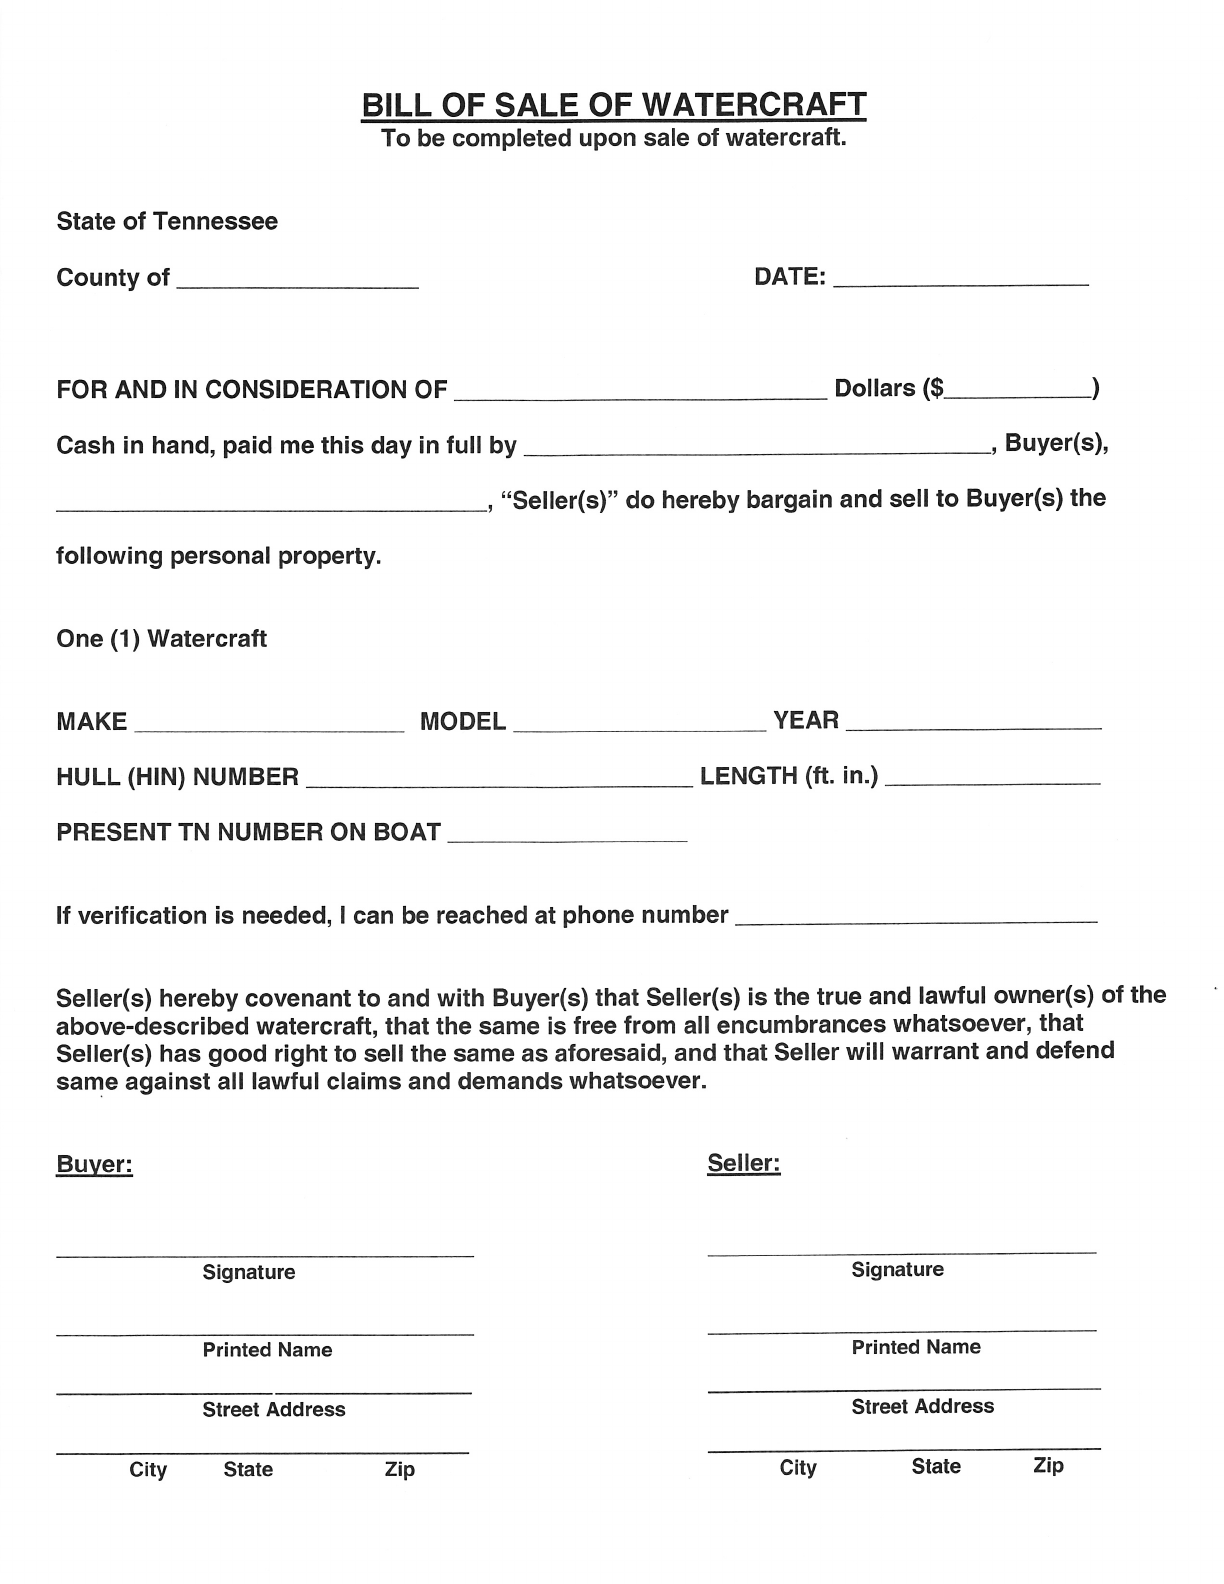 Tennessee Watercraft Bill of Sale Form